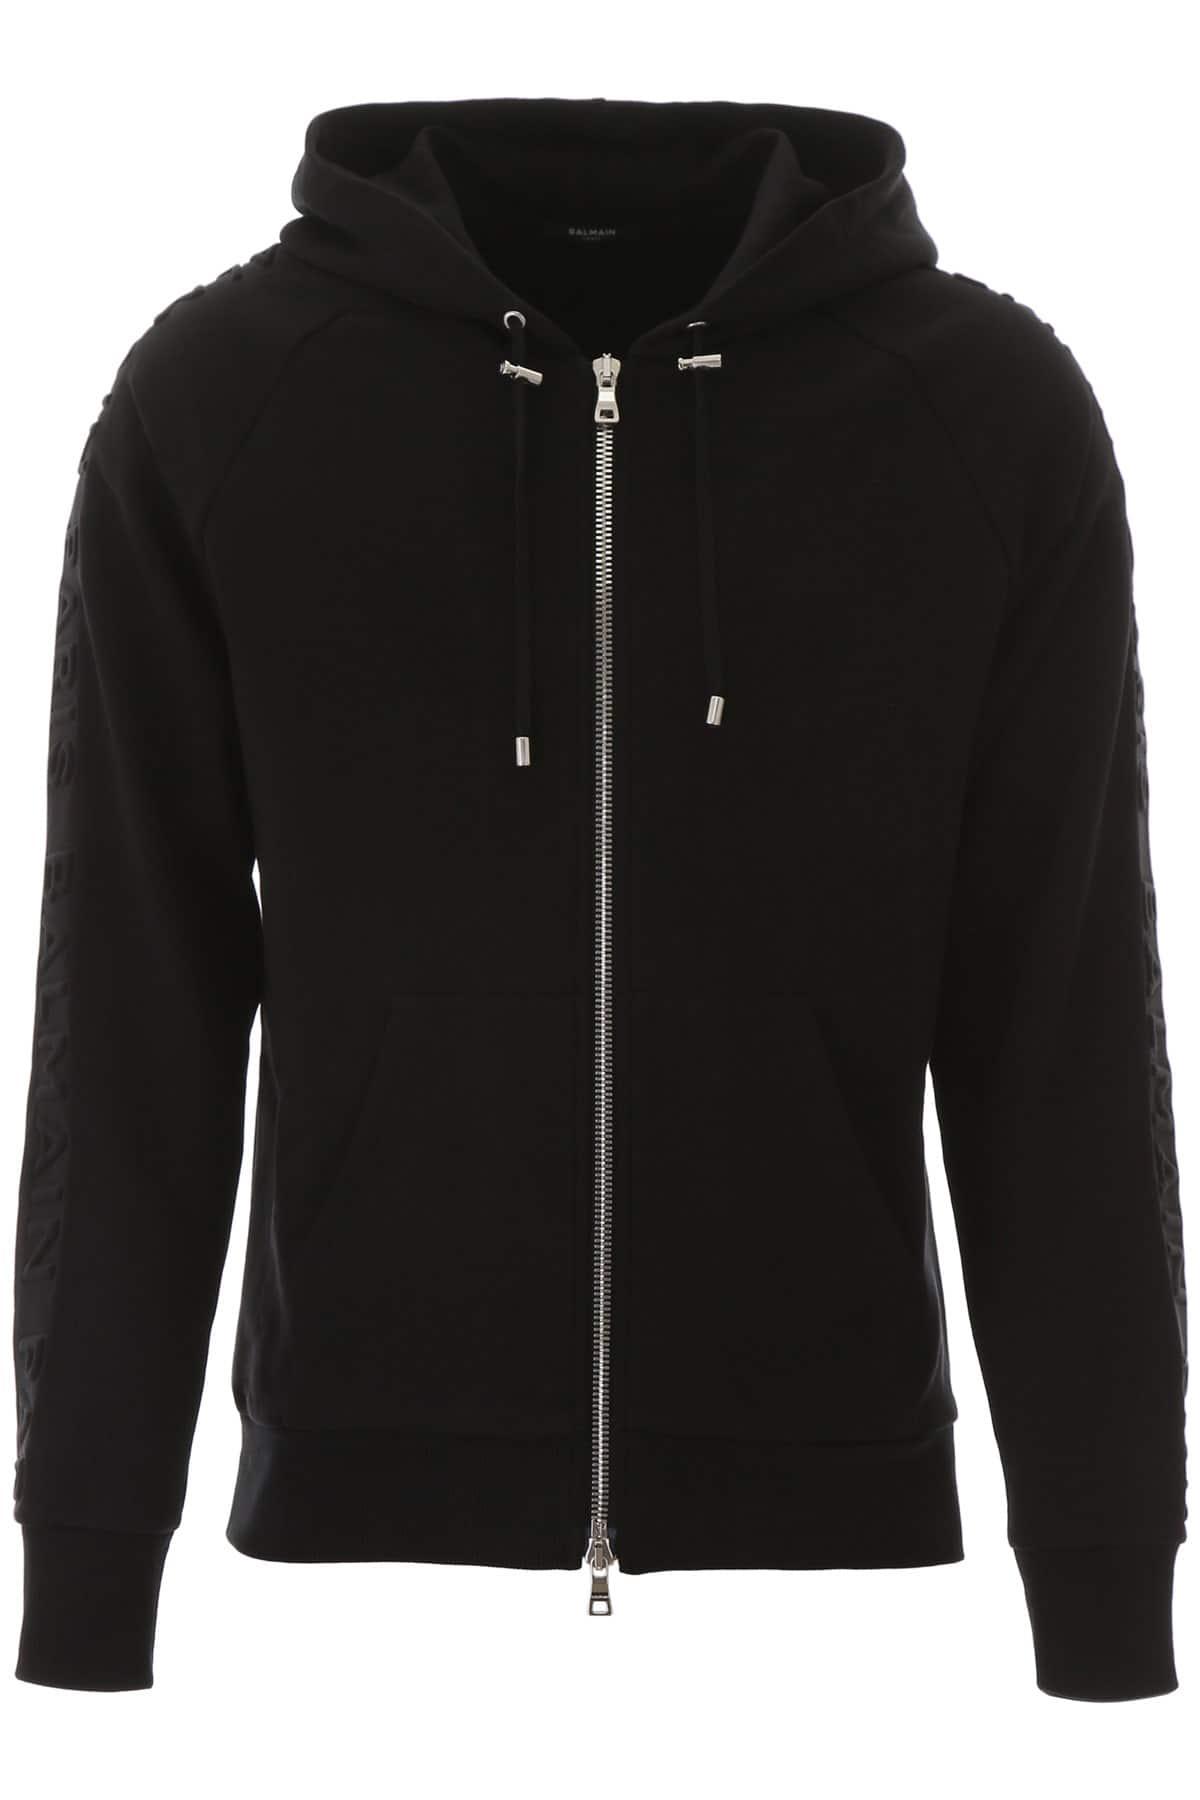 Balmain Cotton Hoodie With Embossed Logo in Black for Men - Lyst